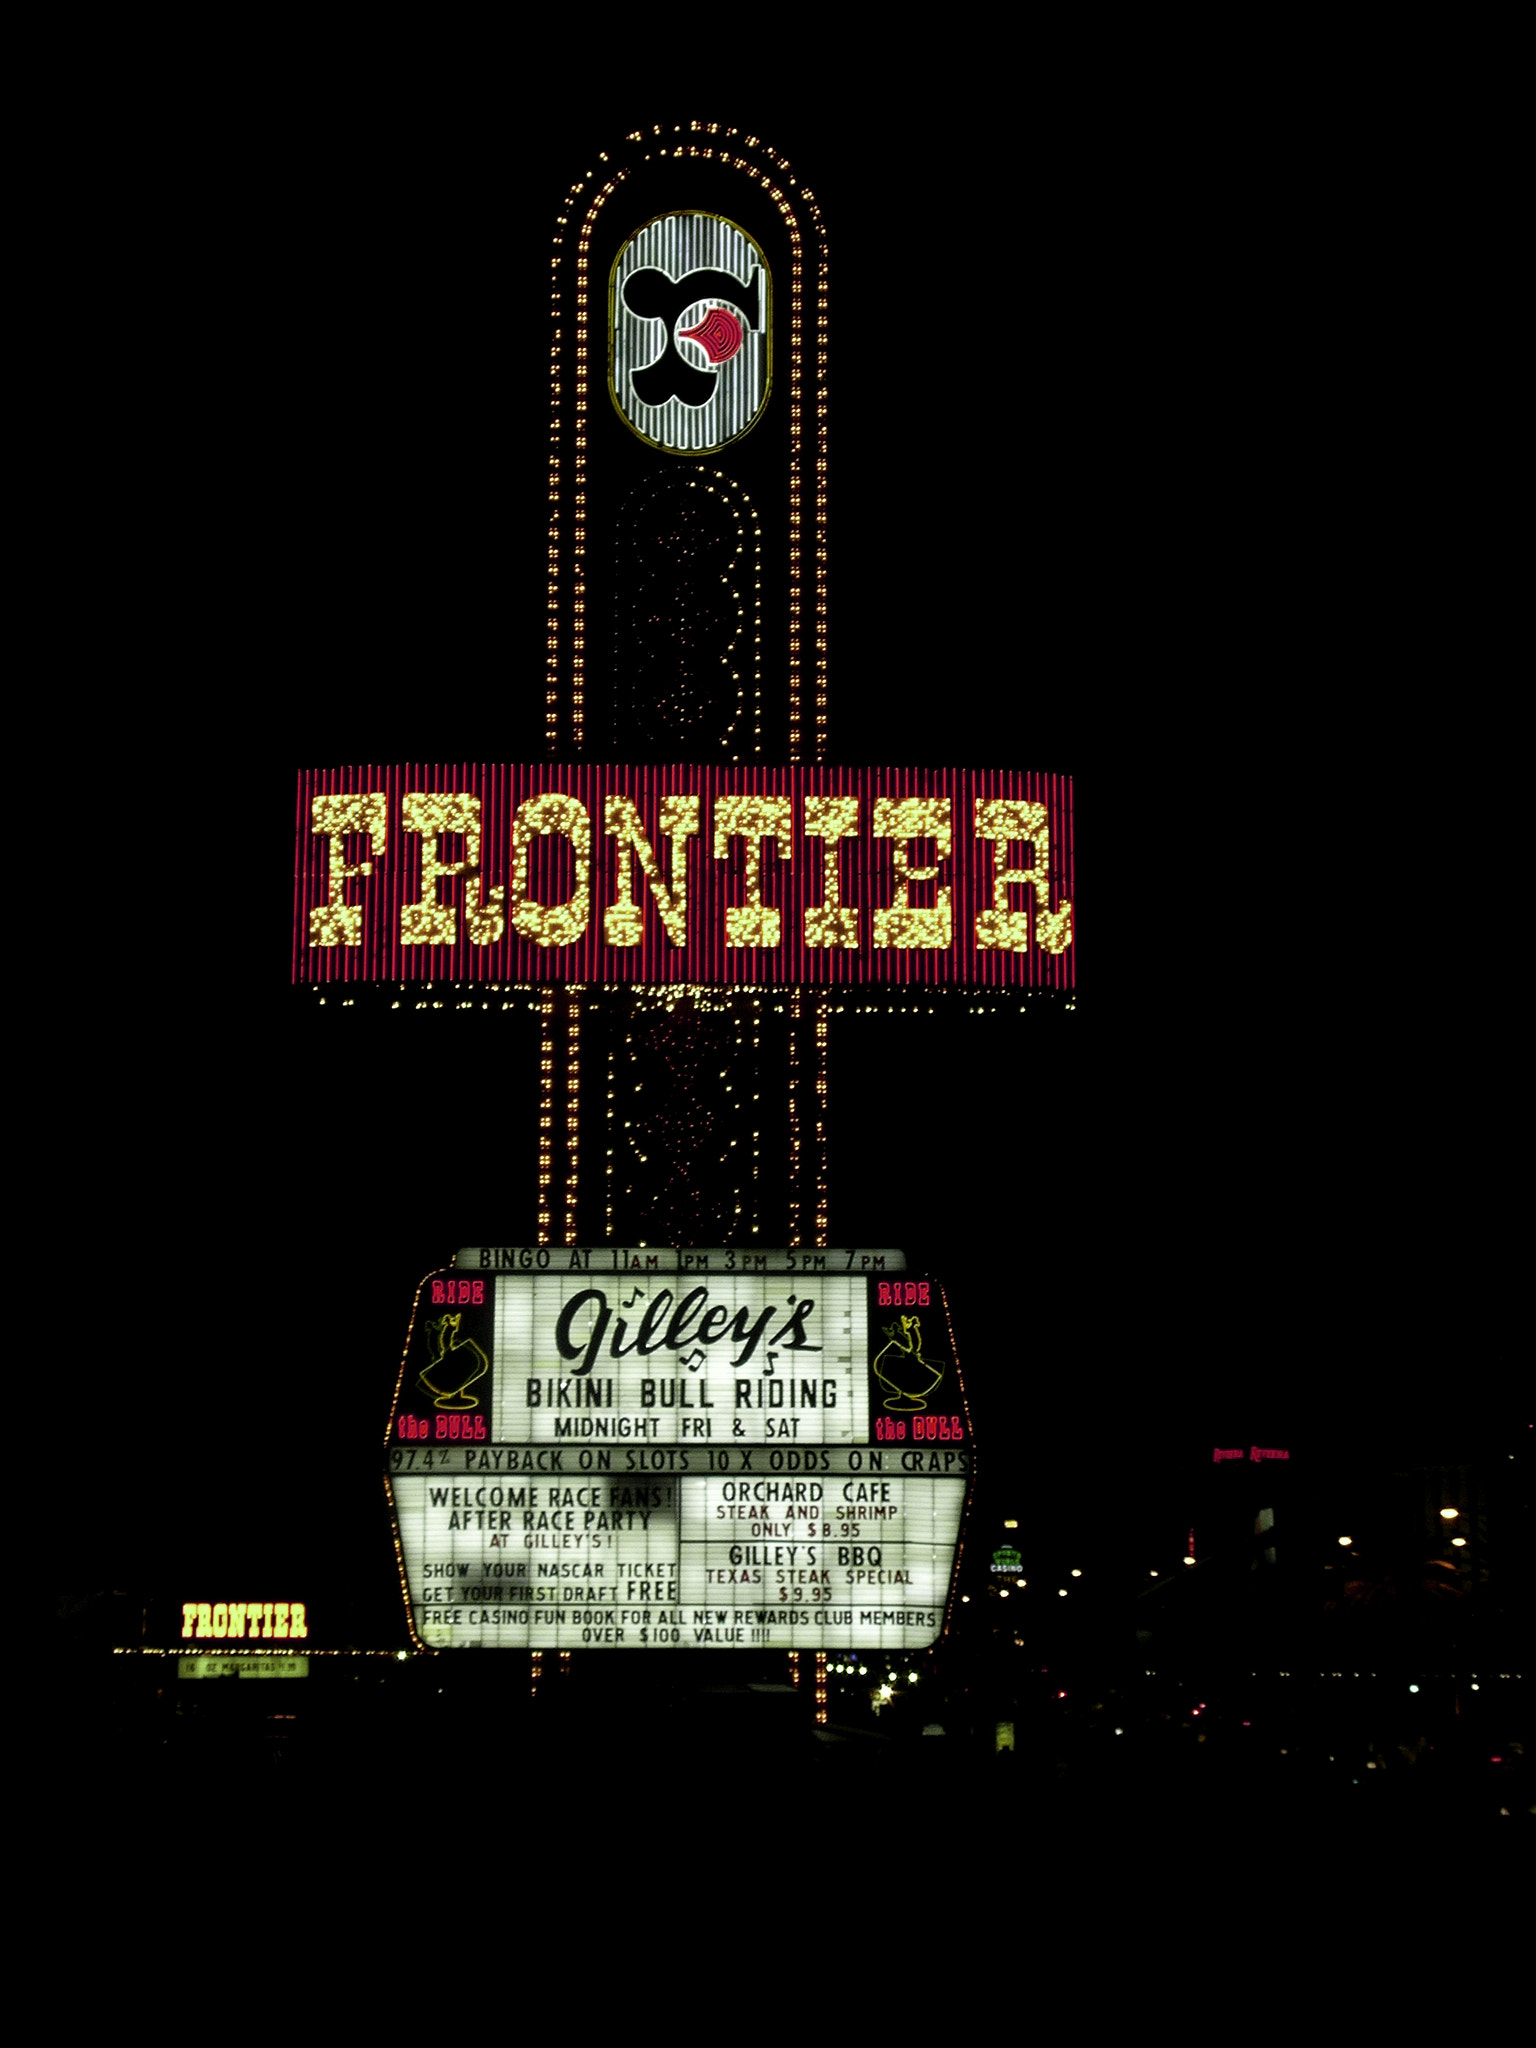 A color photograph of the old Frontier Sign